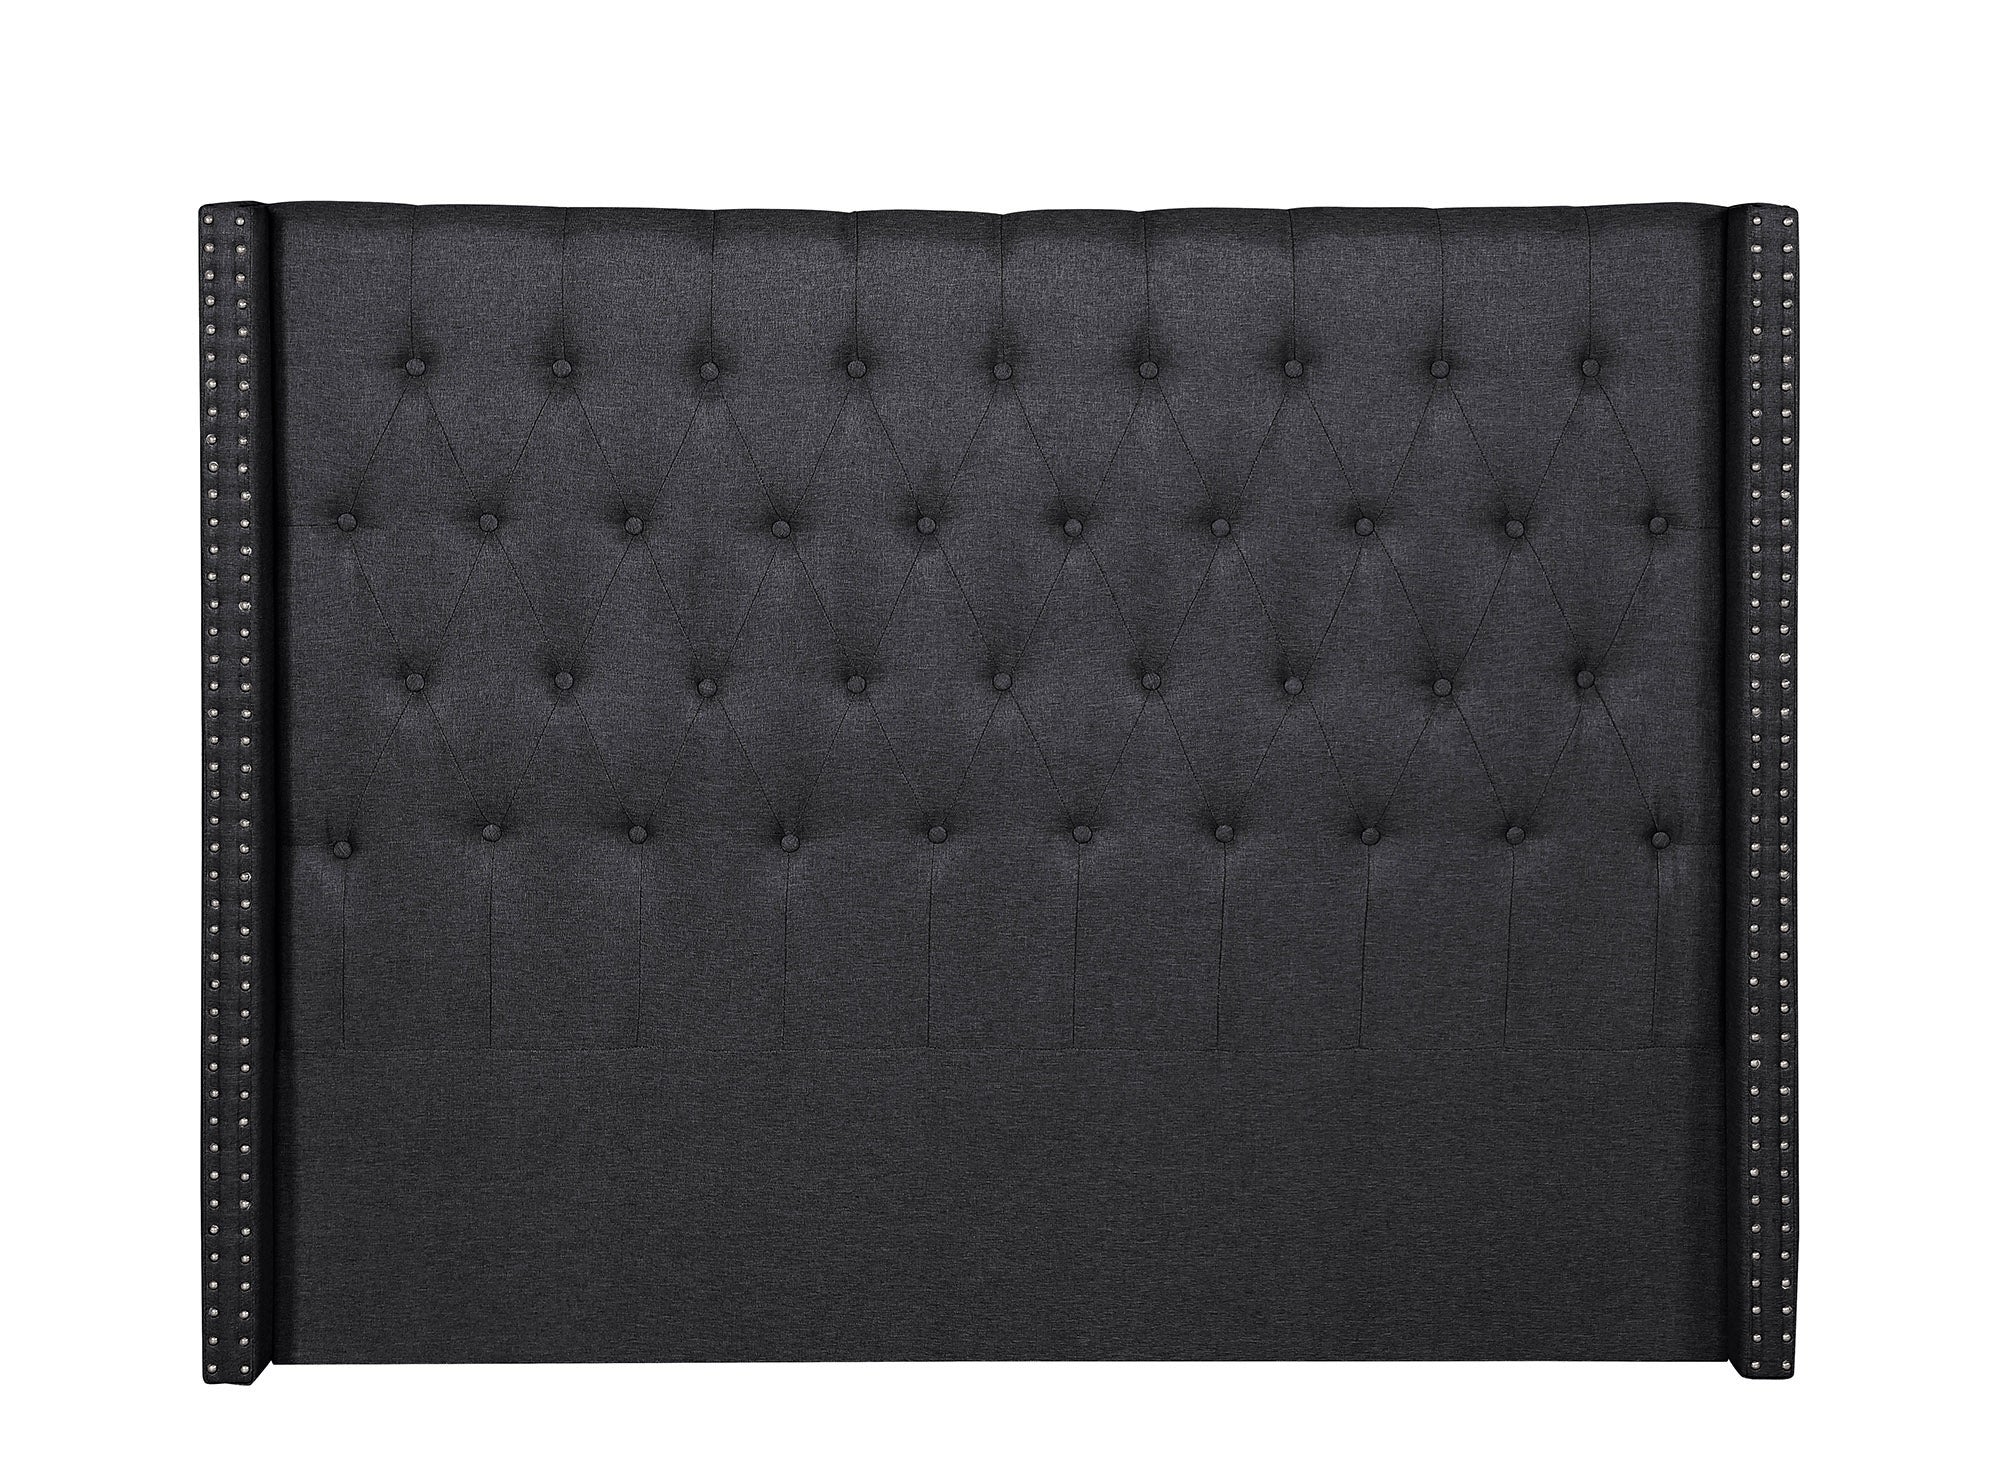 Foret Bed Head Double Size Headboard Bedhead Frame Base Stud Tufted Fabric Black